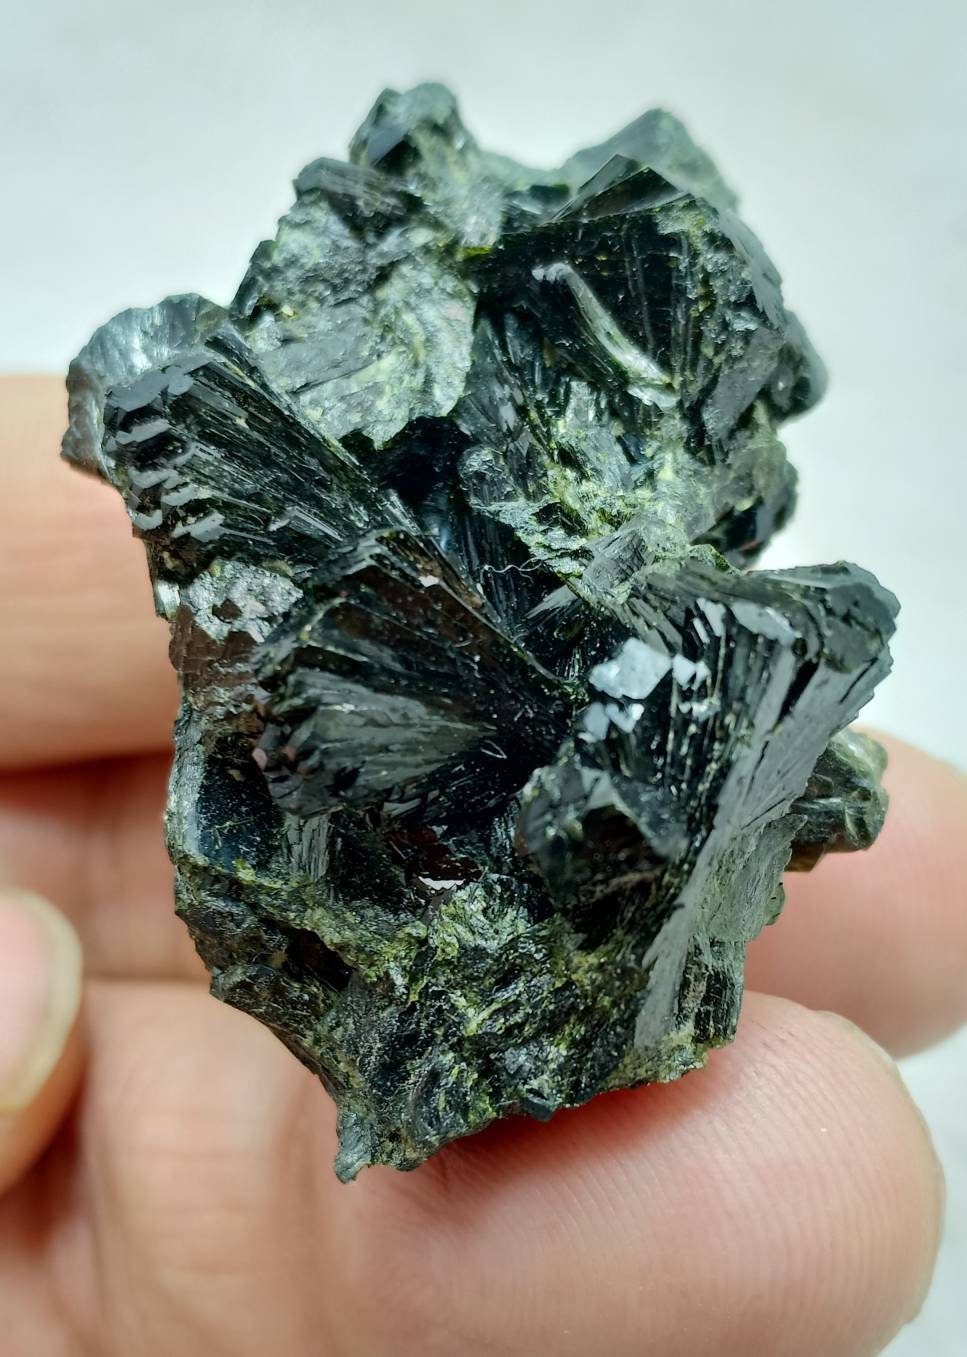 Bow tie Epidote cluster with beautiful terminations 42 grams